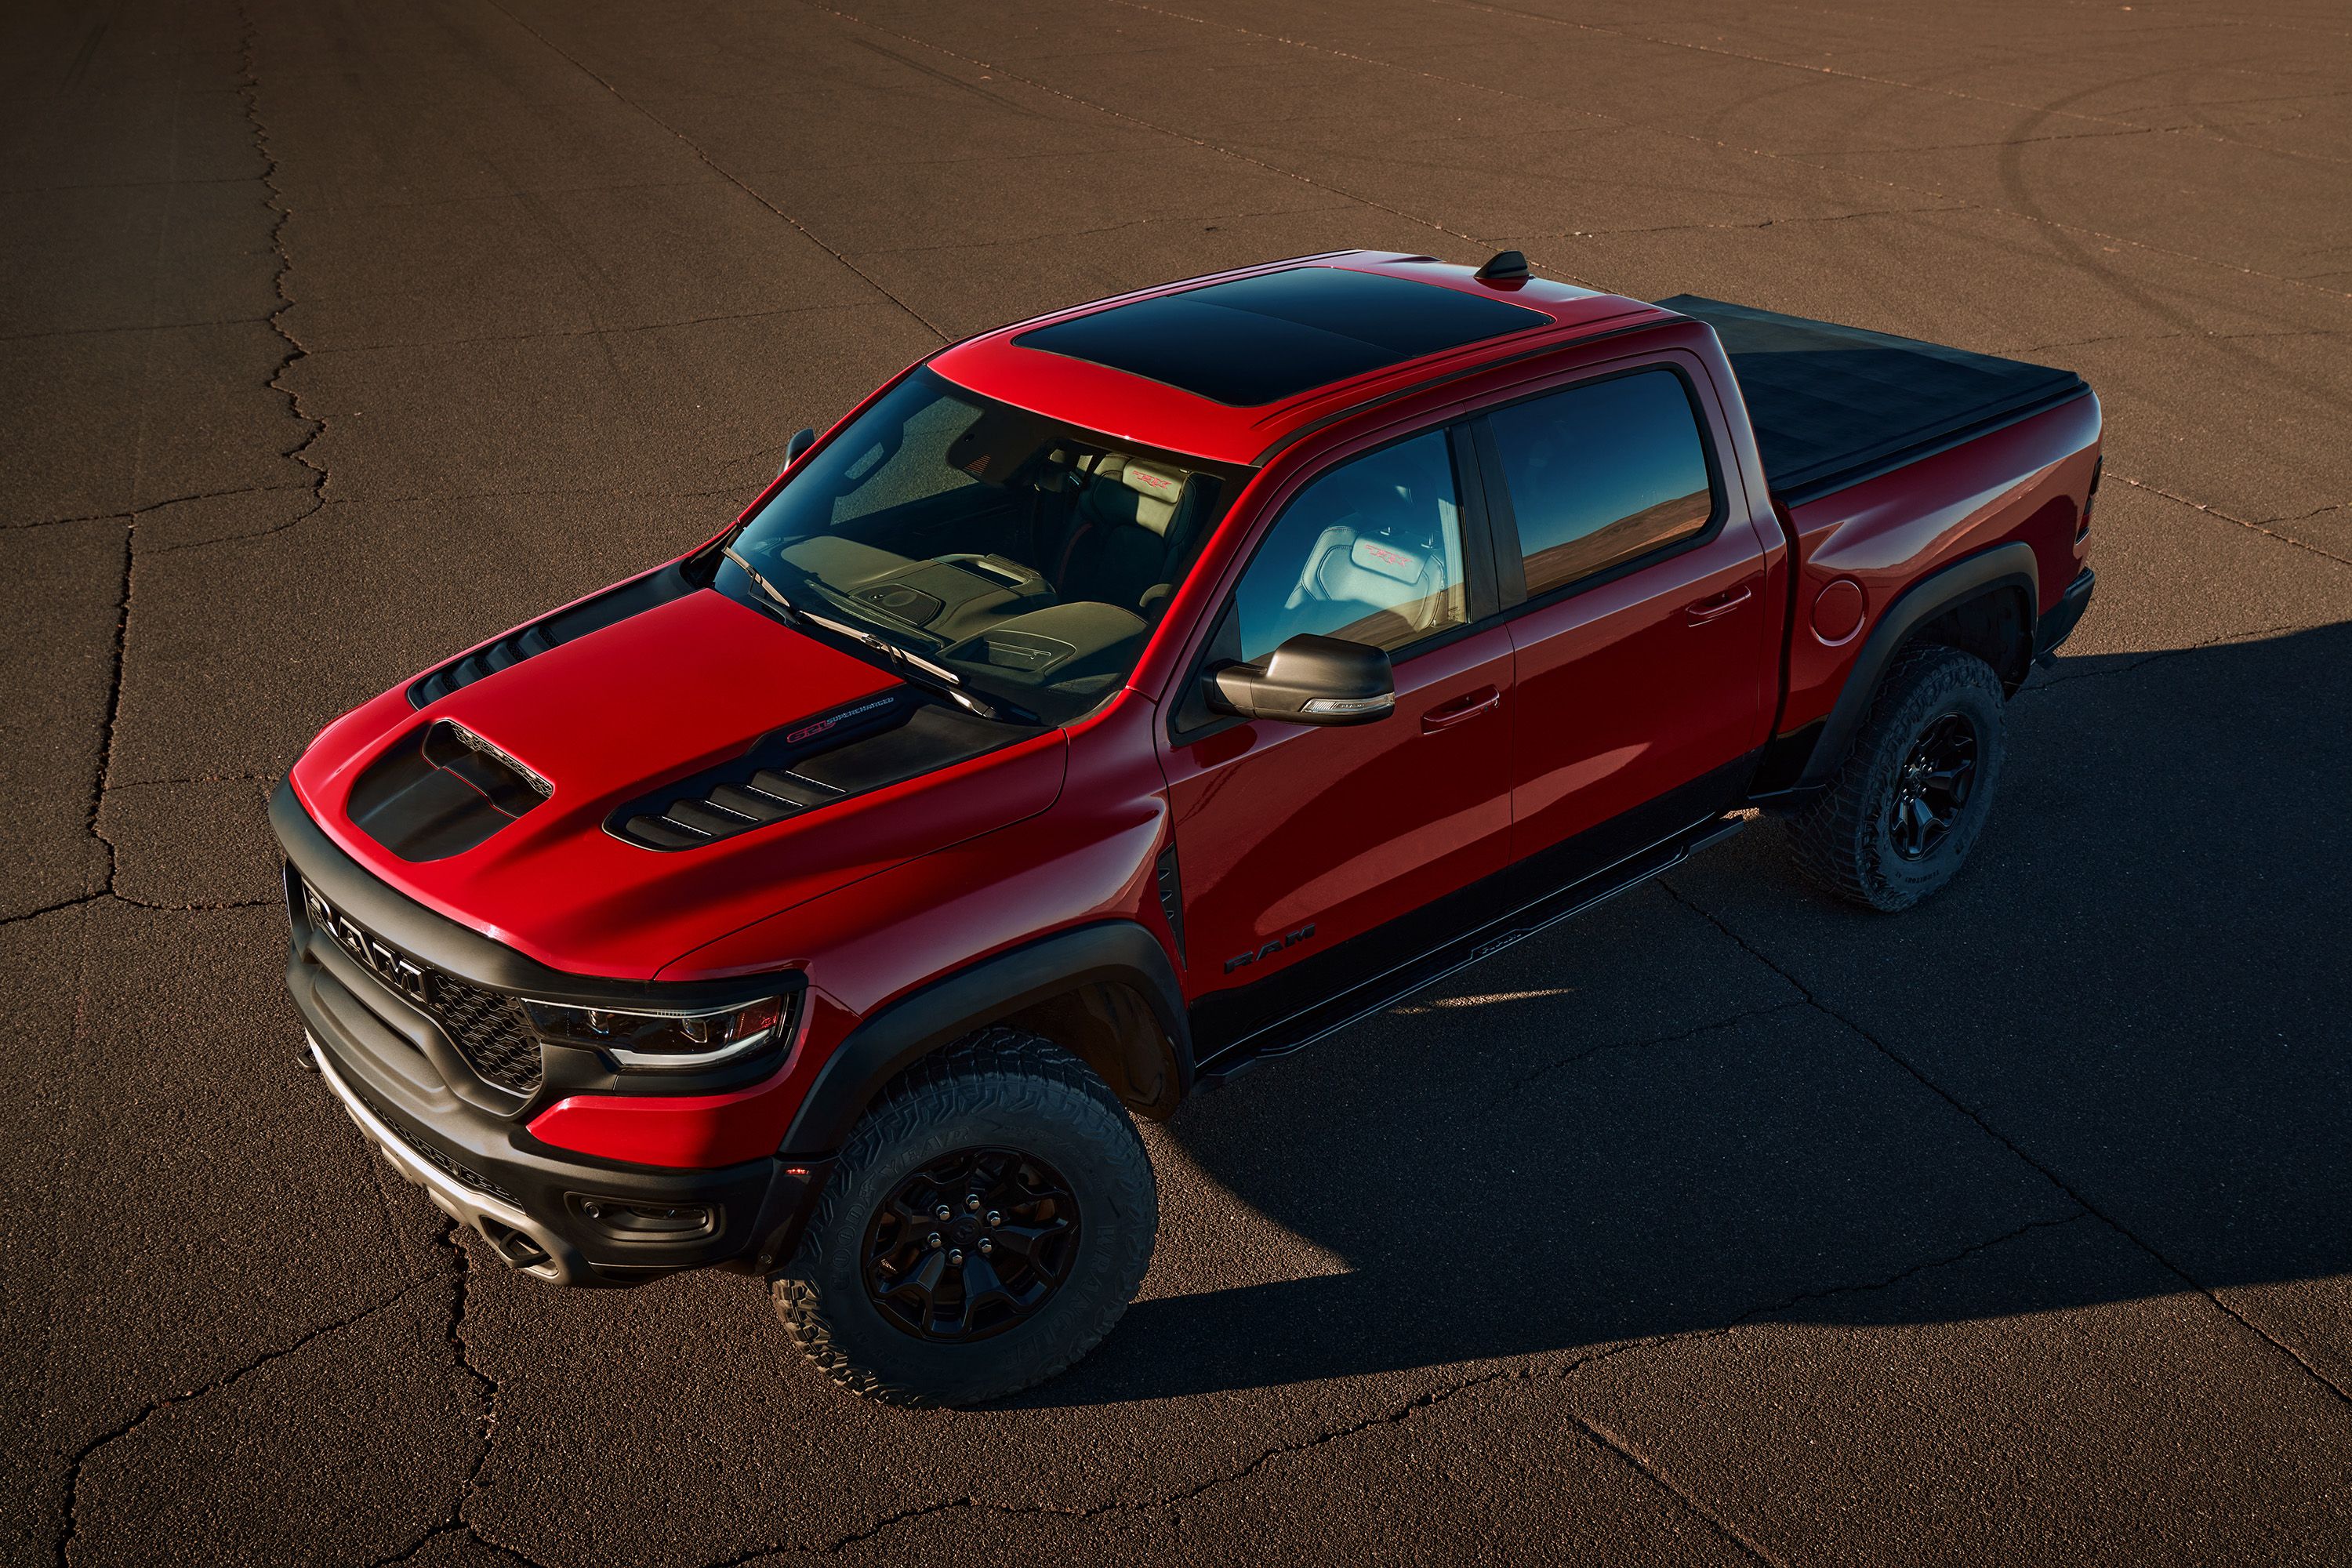 2021 The Ram 1500 TRX Might Be Associated With the T-Rex Dinosaur, But That Wasn't the Intention